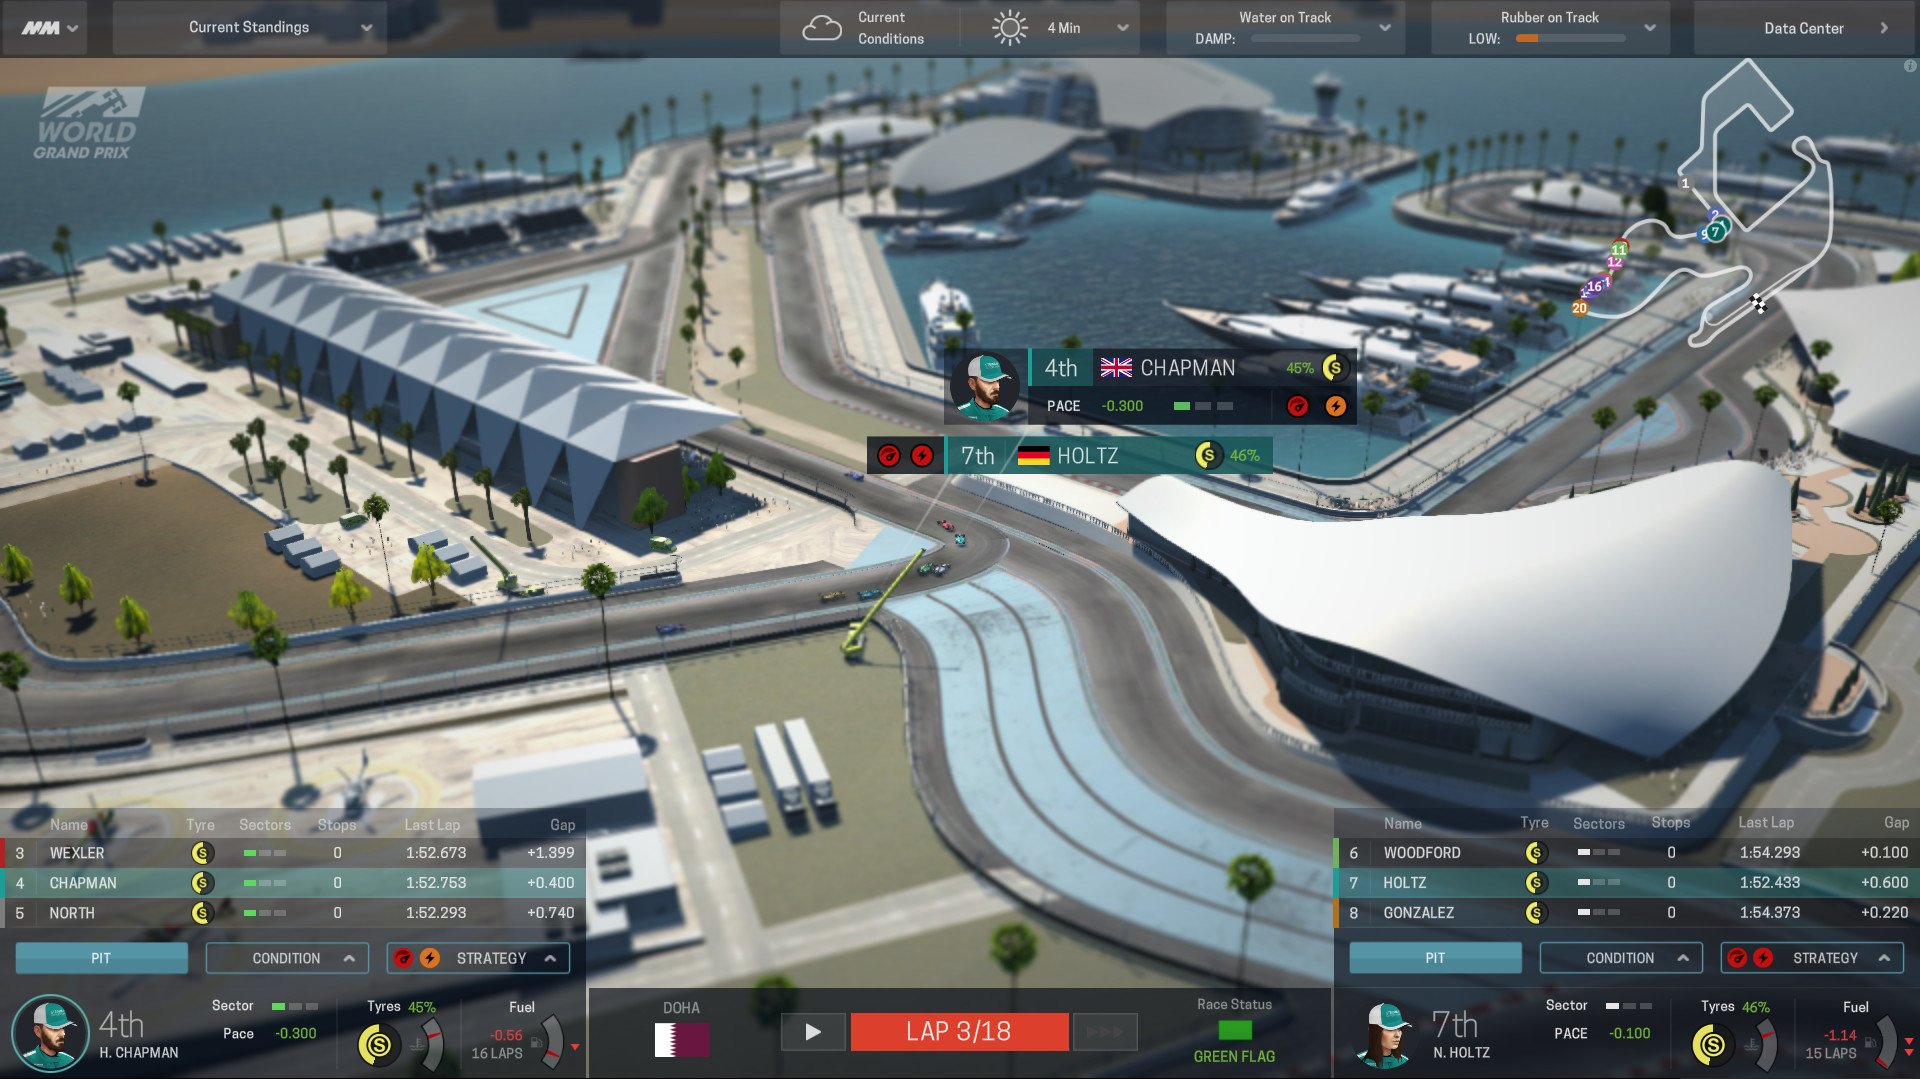 More information about "Motorsport Manager: nuovo DLC ed update in arrivo"